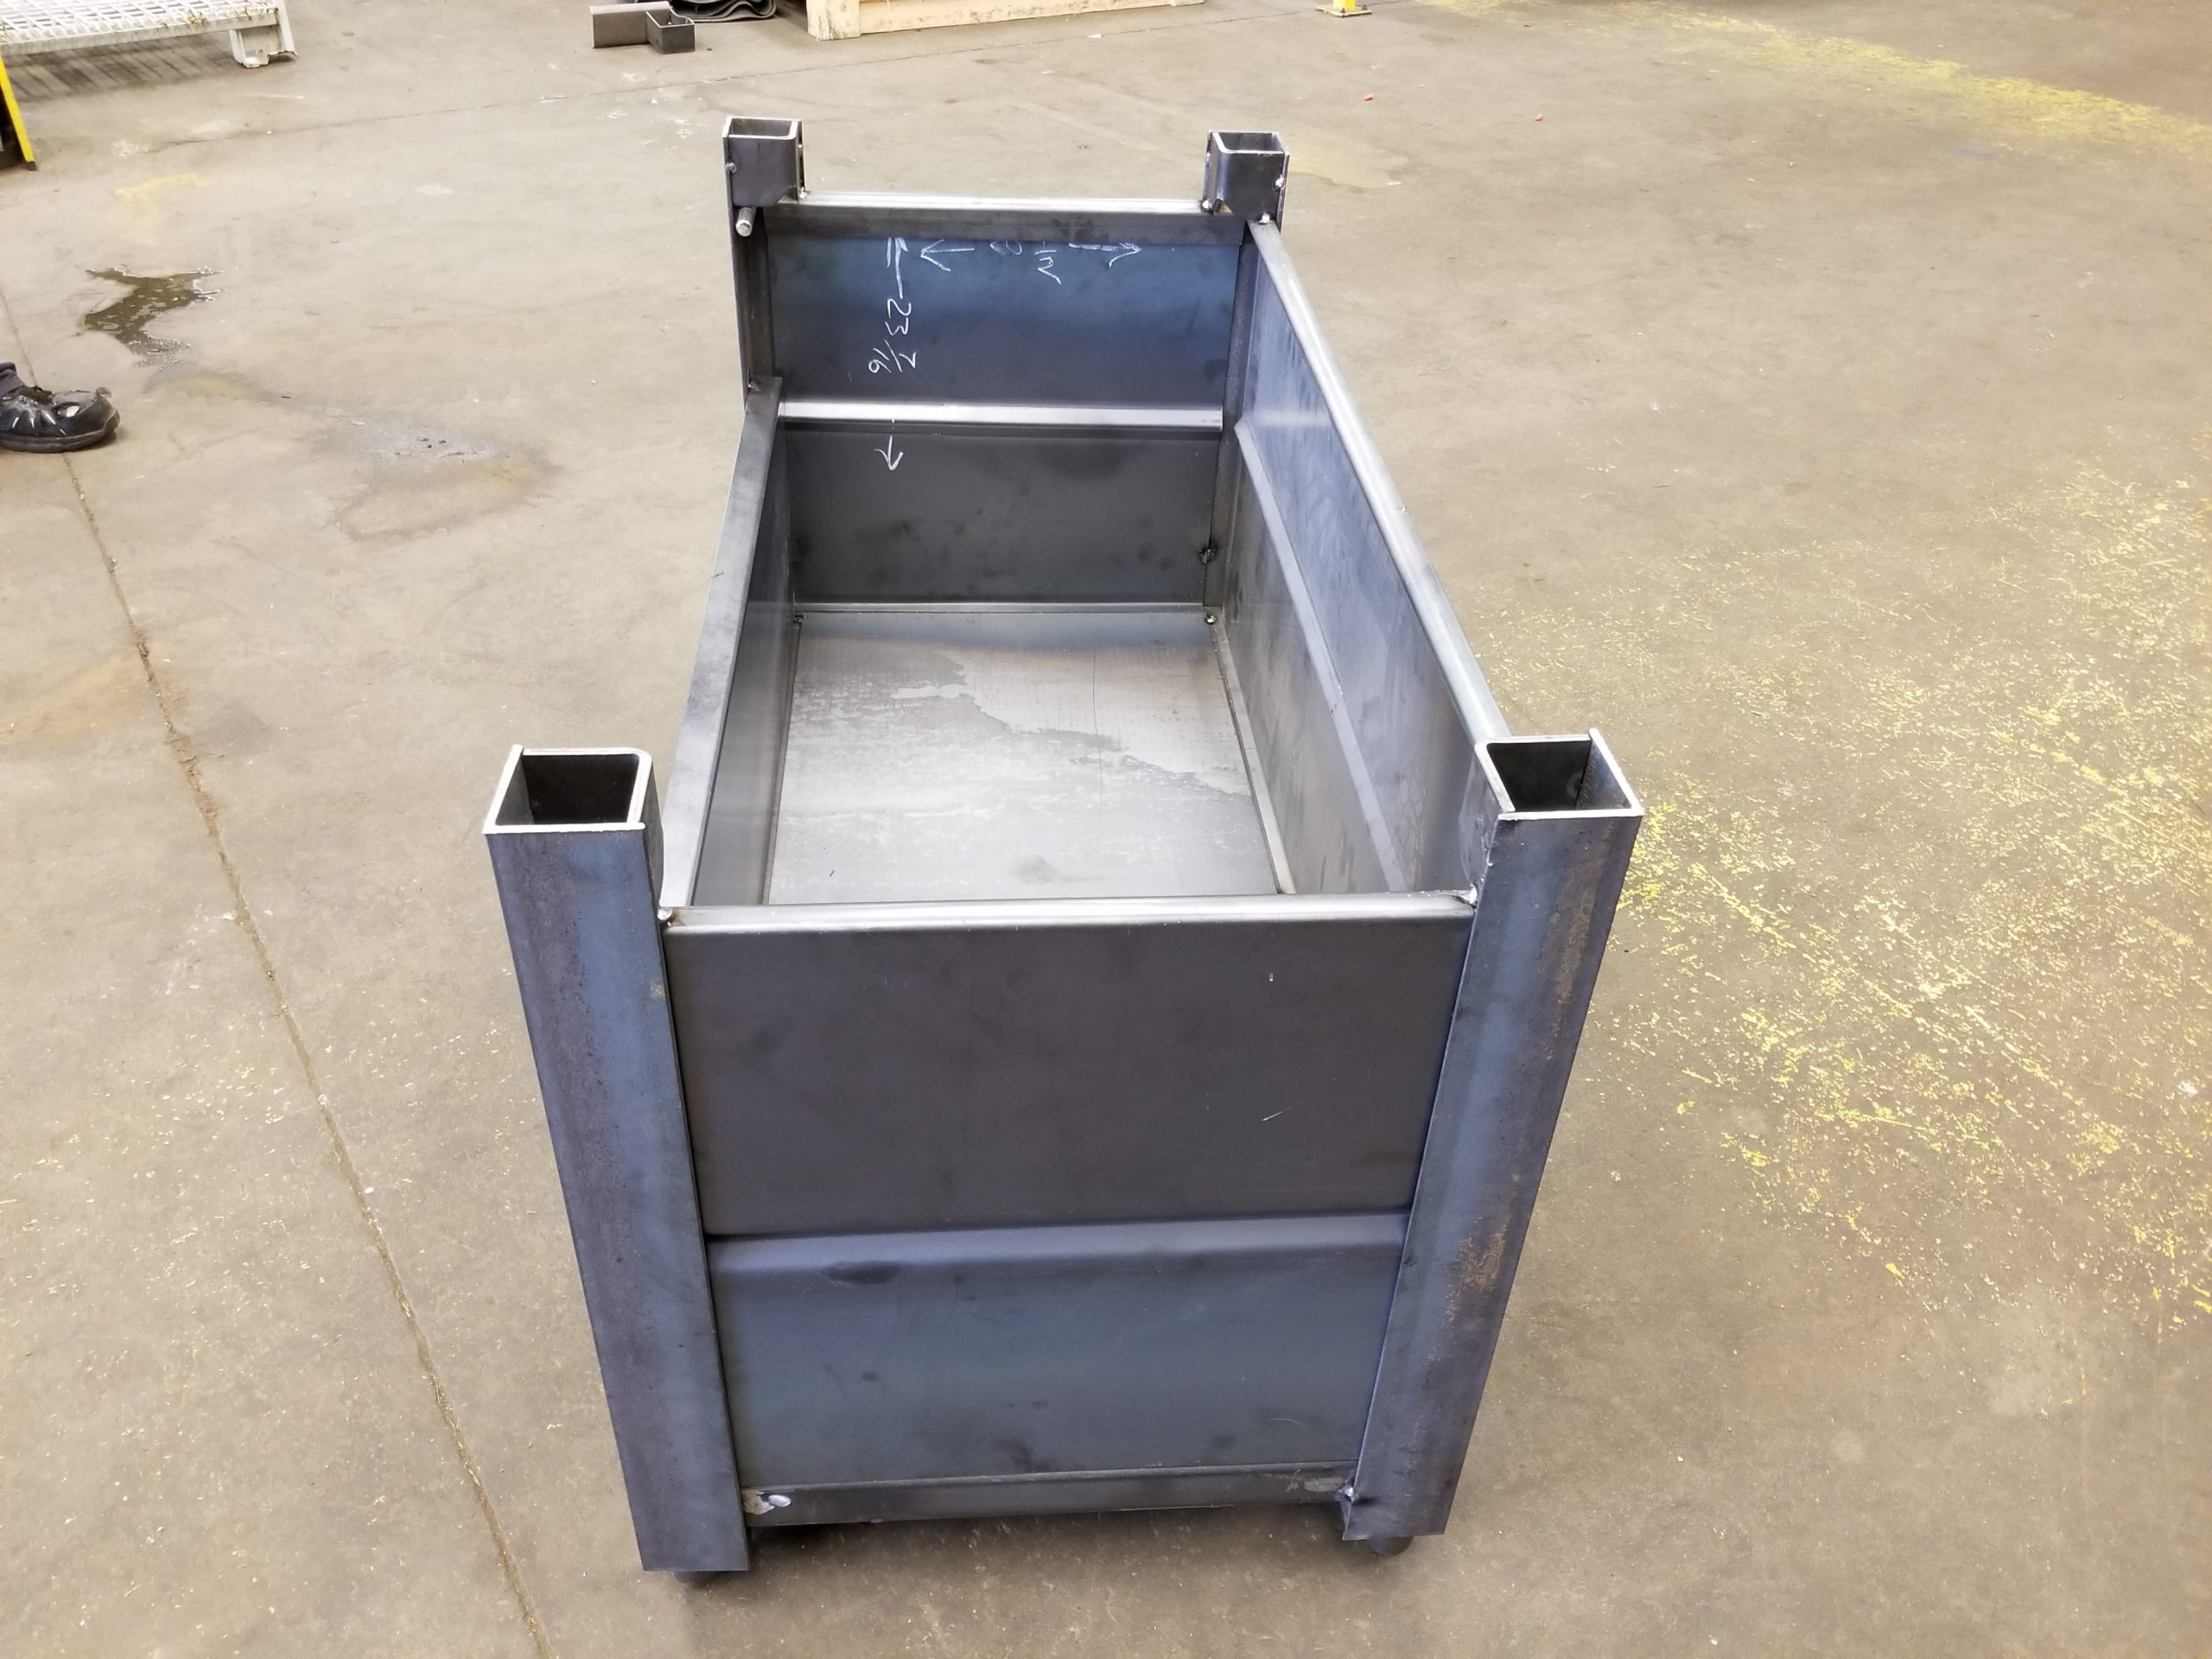 Industrial Automotive Rigid Sheet Metal Steel Bins and Containers